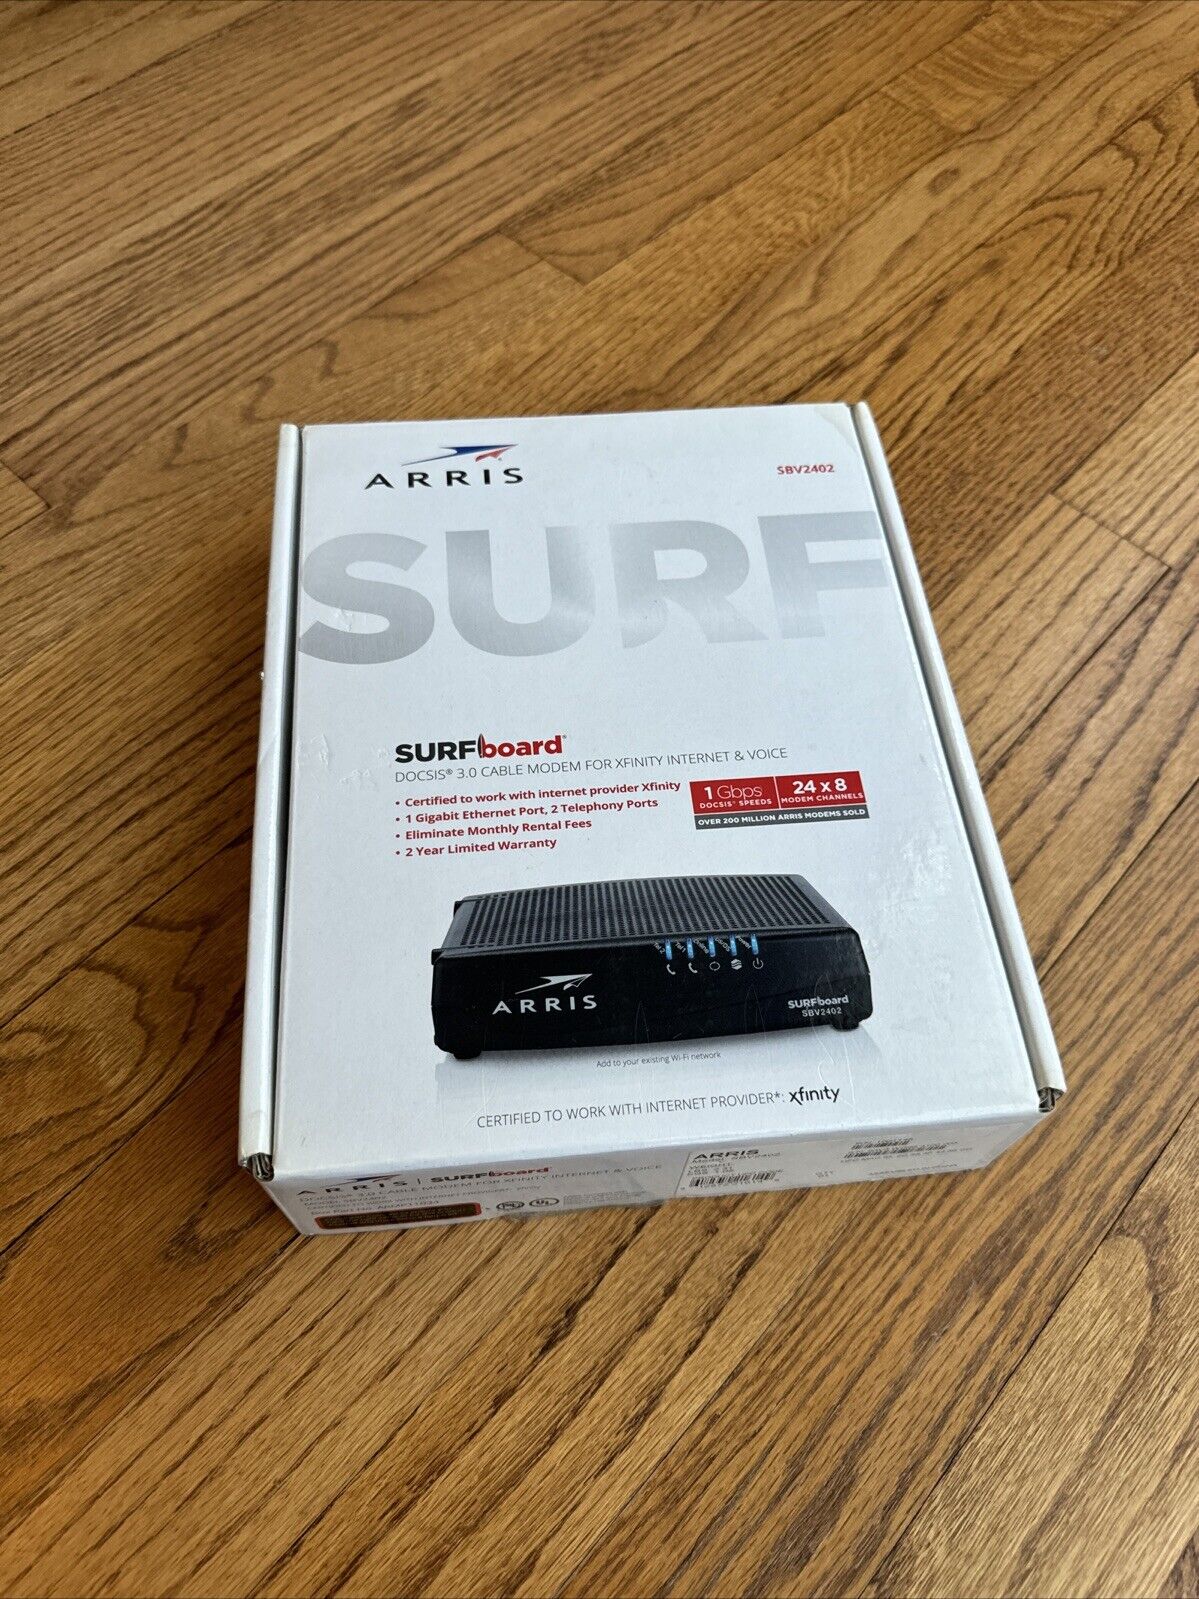 ARRIS SURFboard (24x8) DOCSIS 3.0 Cable Modem Xfinity (SBV2402) - NEW OPEN BOX